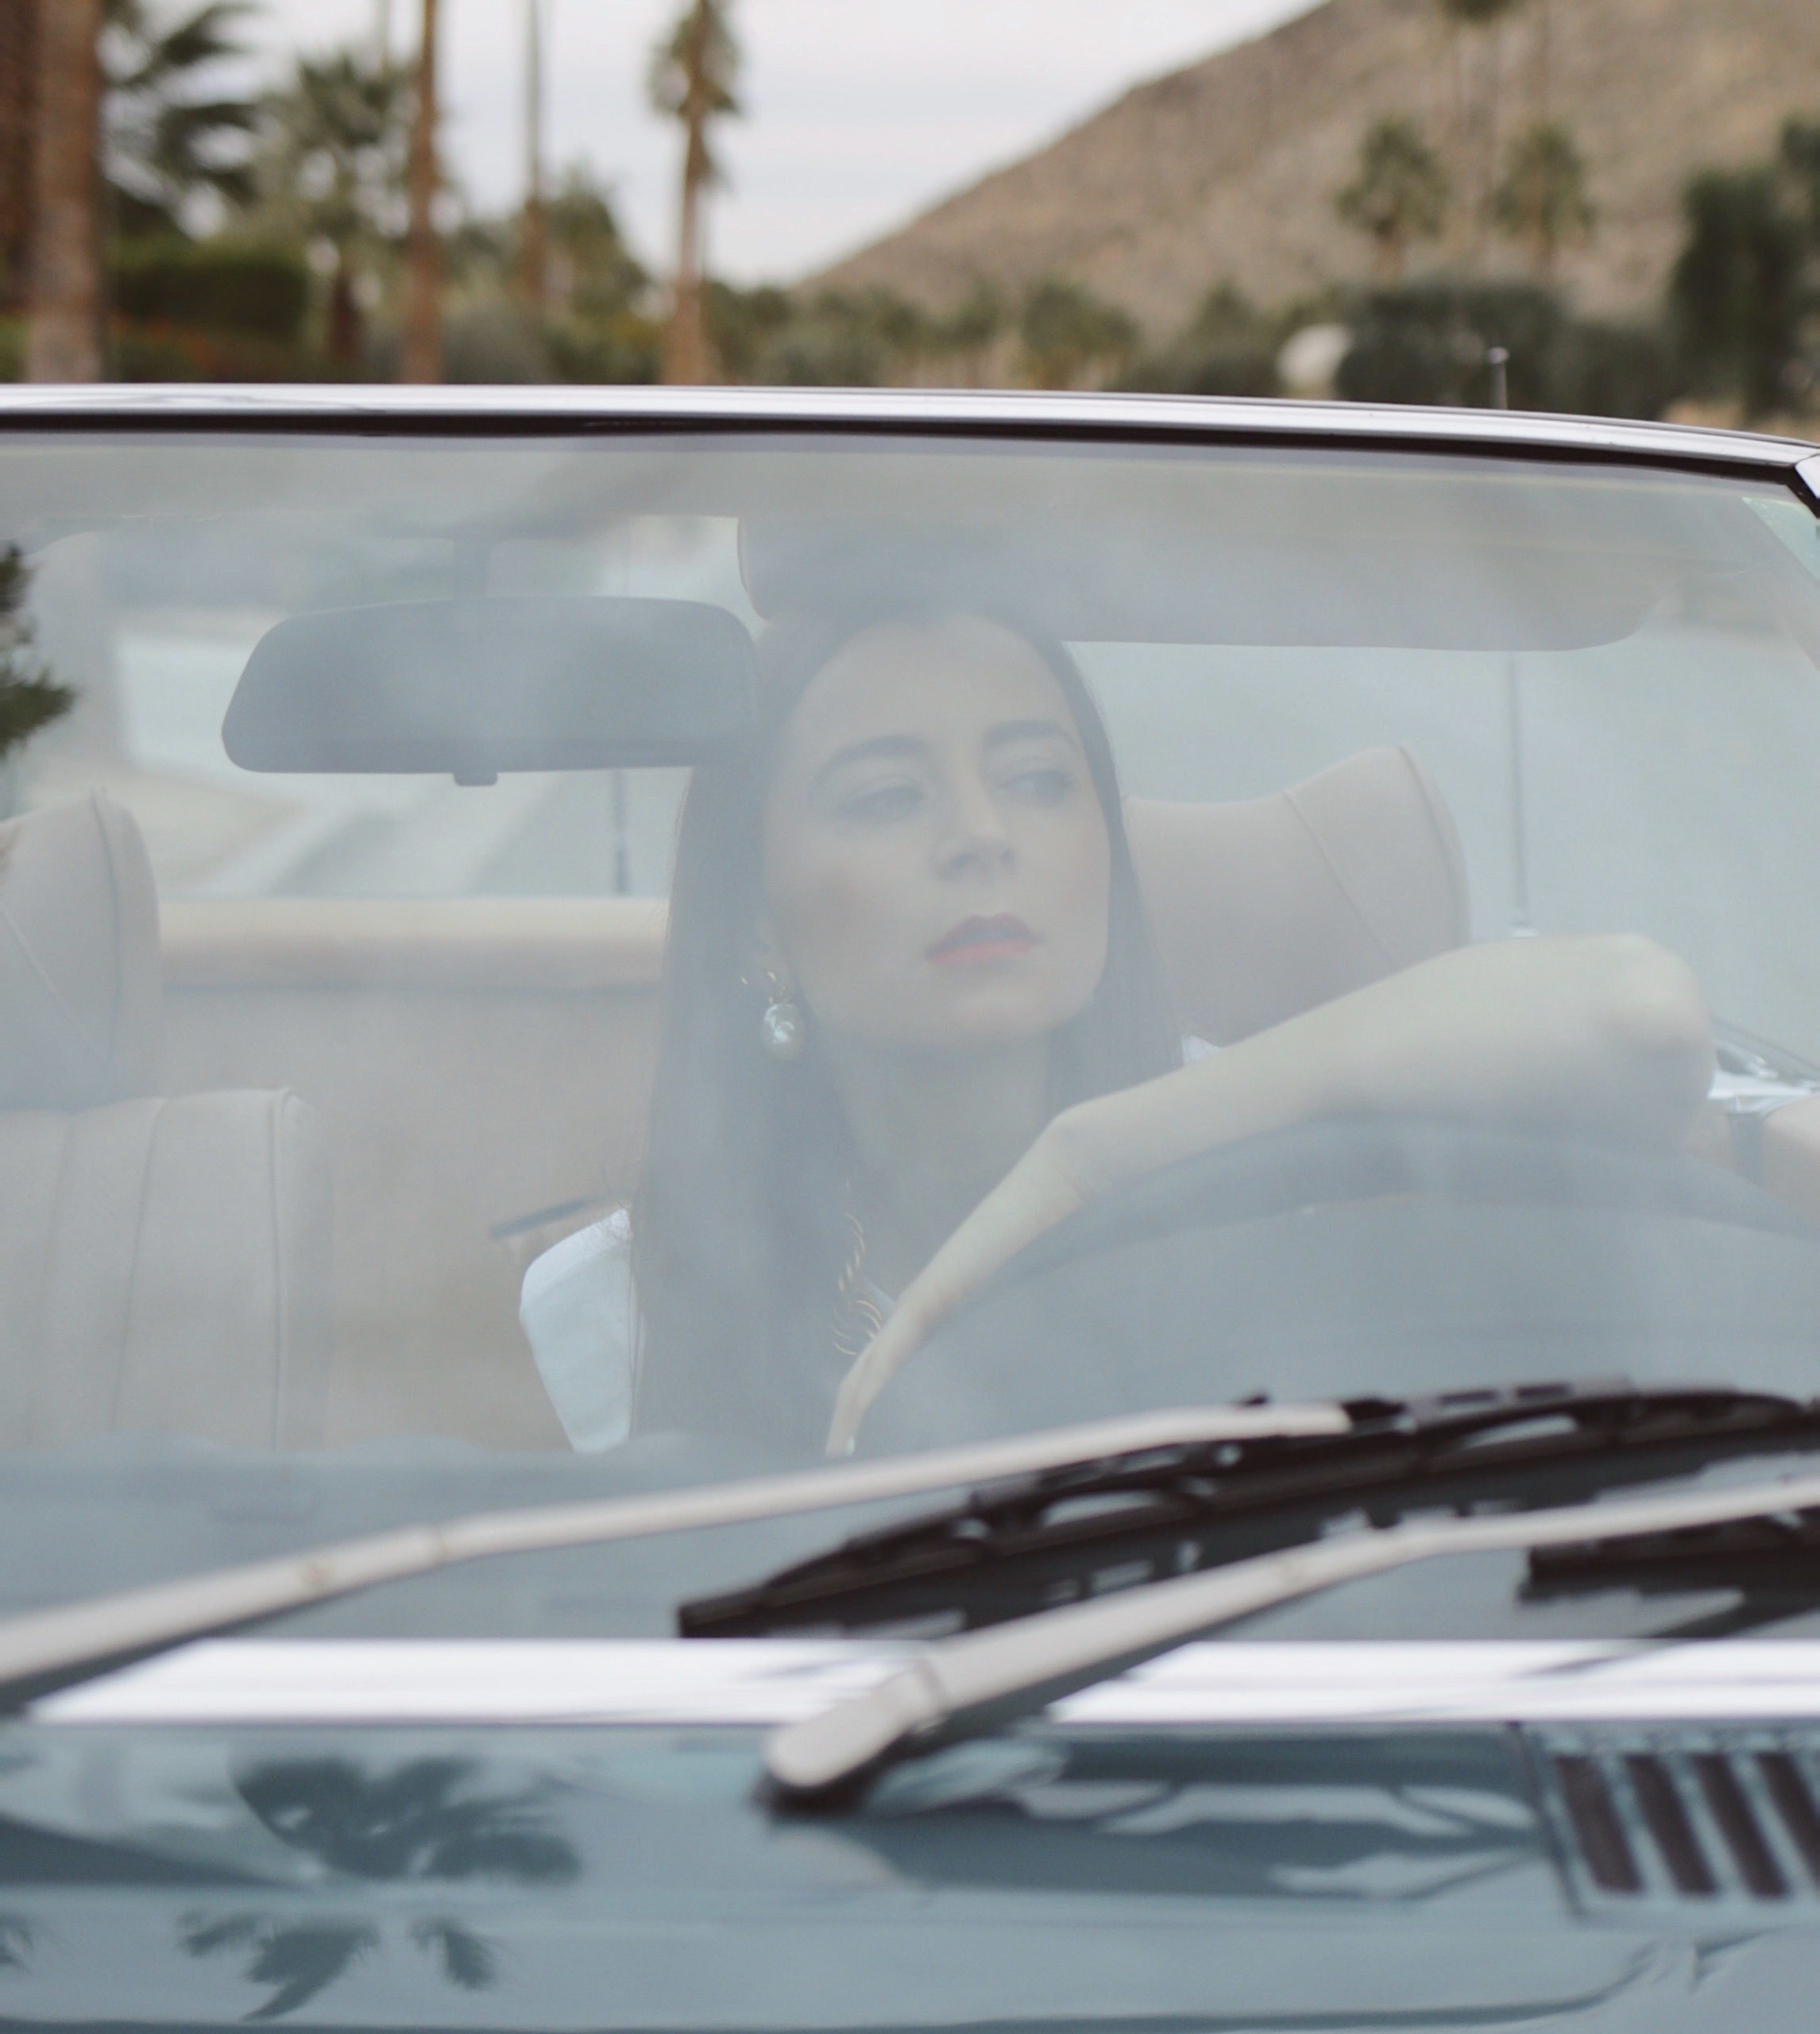 California Dreaming +california + road trip + los angeles + julia comil + modersvp + fashion + editorial + influencer + french + inspiration + palm springs + old car + vintage car